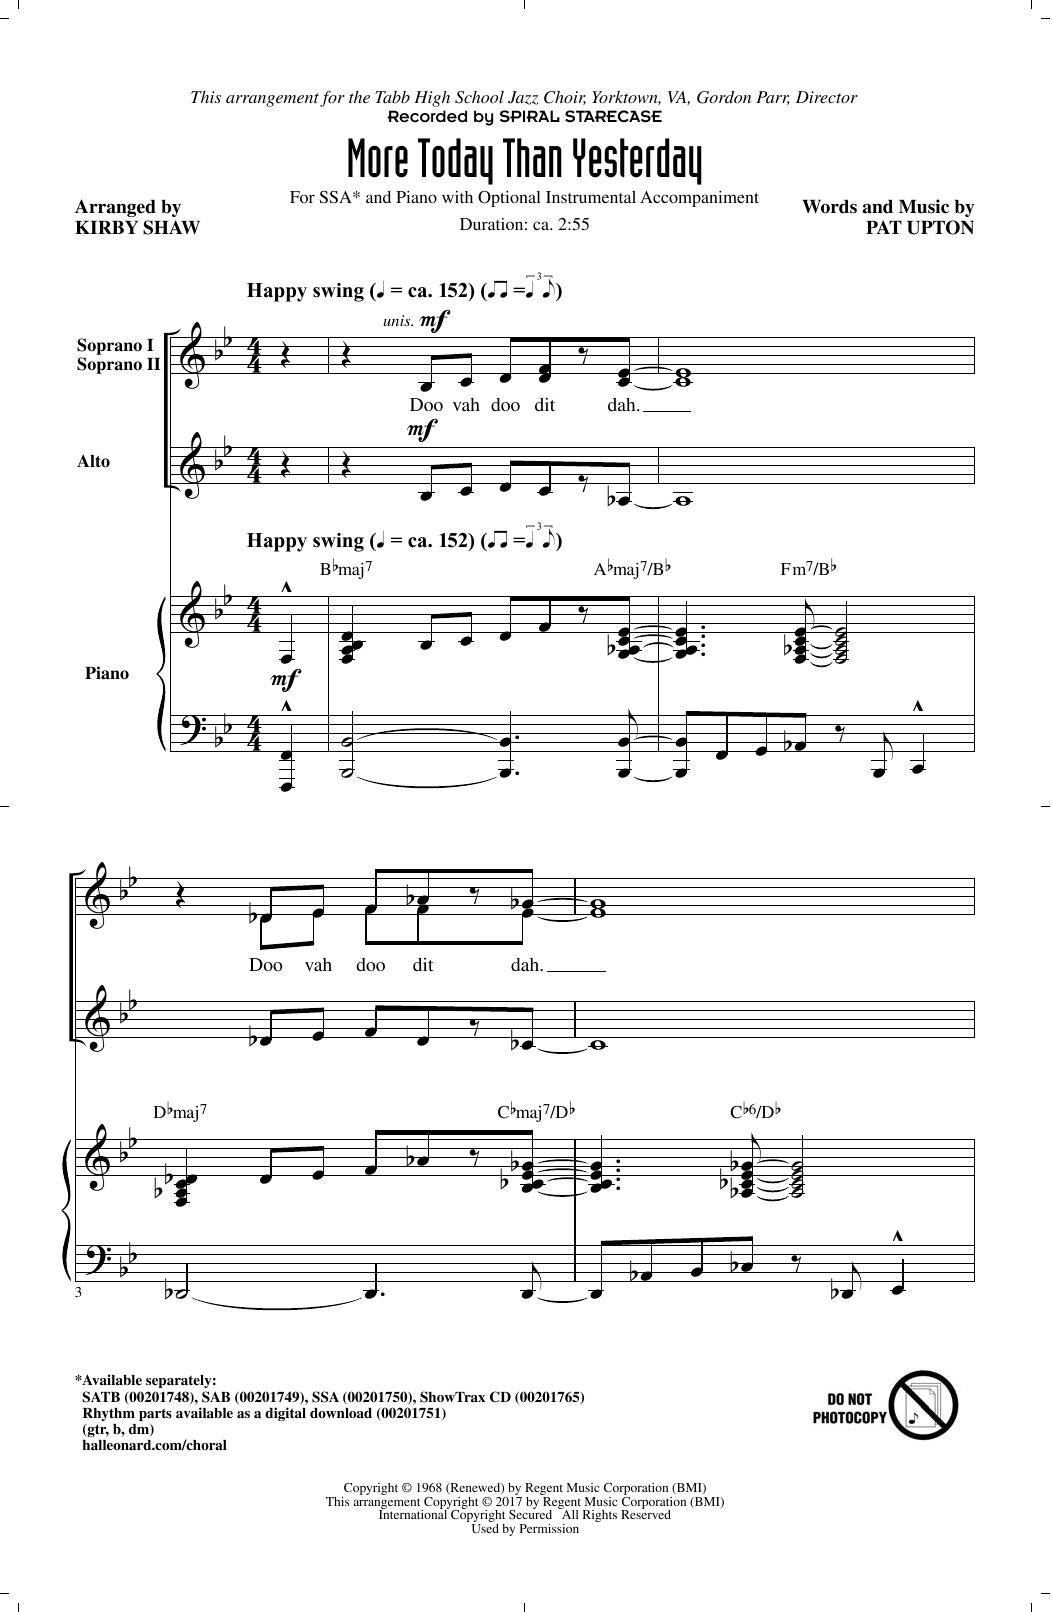 Download Kirby Shaw More Today Than Yesterday Sheet Music